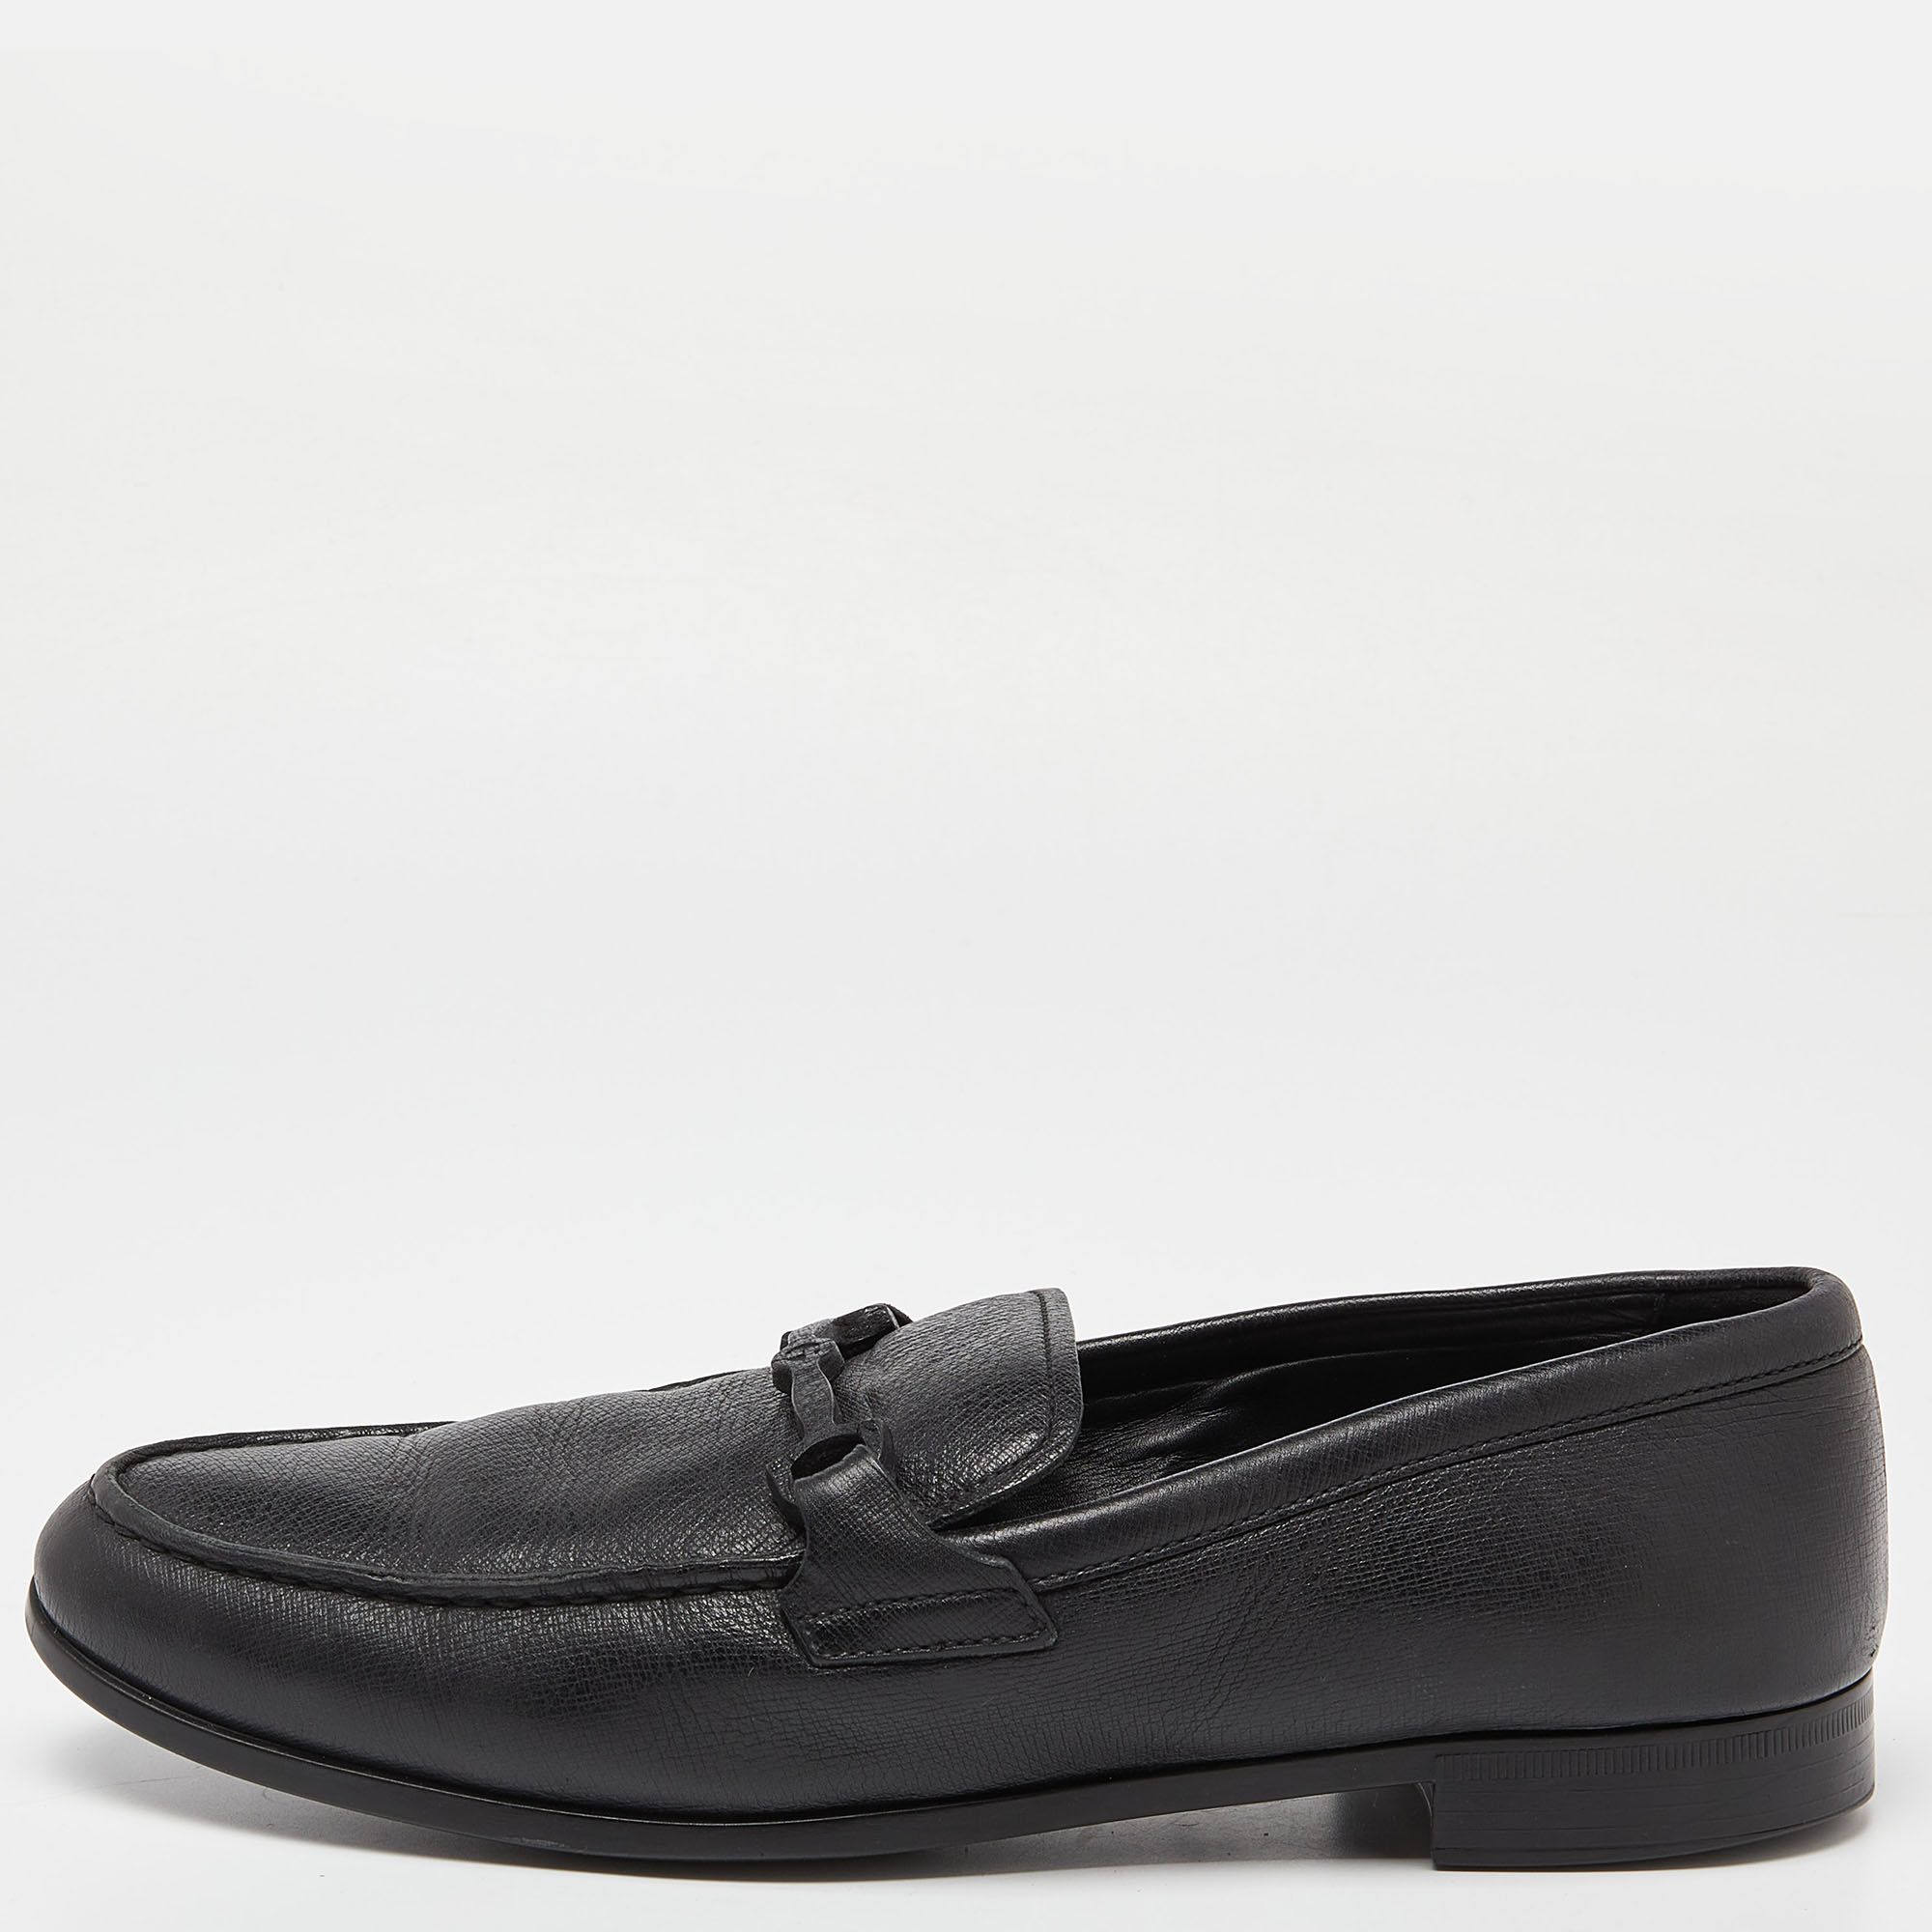 Pre-owned Giorgio Armani Black Leather Slip On Loafers Size 41.5